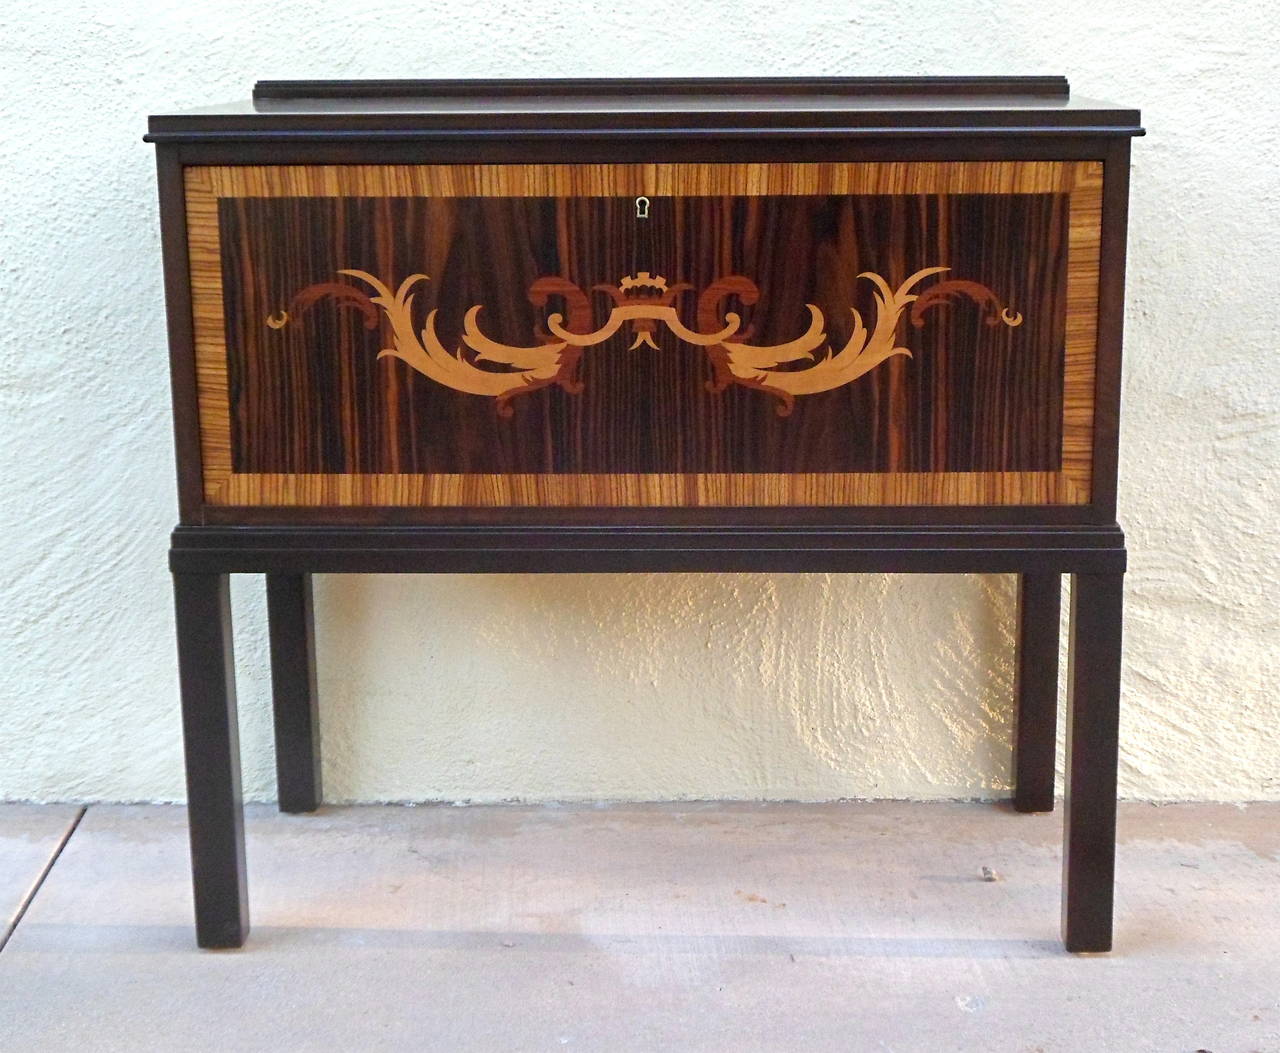 Swedish Art Deco era inlaid hall cabinet. Case in solid, stained birchwood. Inlaid door design, an enlarged scale neoclassical frieze, is rendered in zebrawood, rose wood, mahogany and pear. Interior in highly figured golden birch. Interior composed